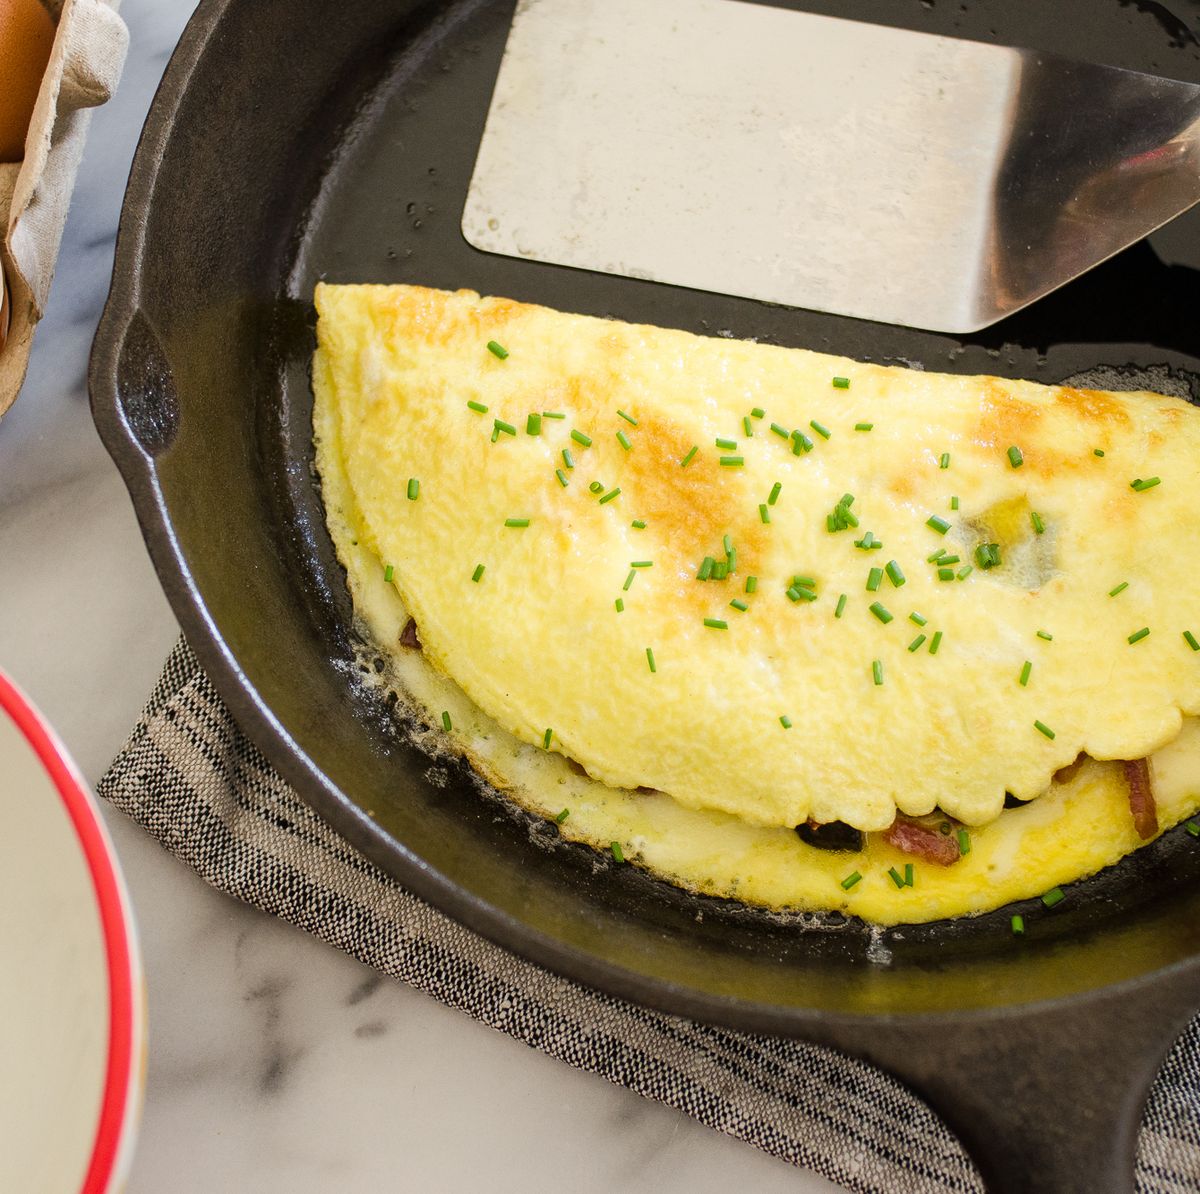 https://hips.hearstapps.com/thepioneerwoman/wp-content/uploads/2016/10/how-to-make-an-omelette-01b.jpg?crop=0.670xw:1.00xh;0.301xw,0&resize=1200:*